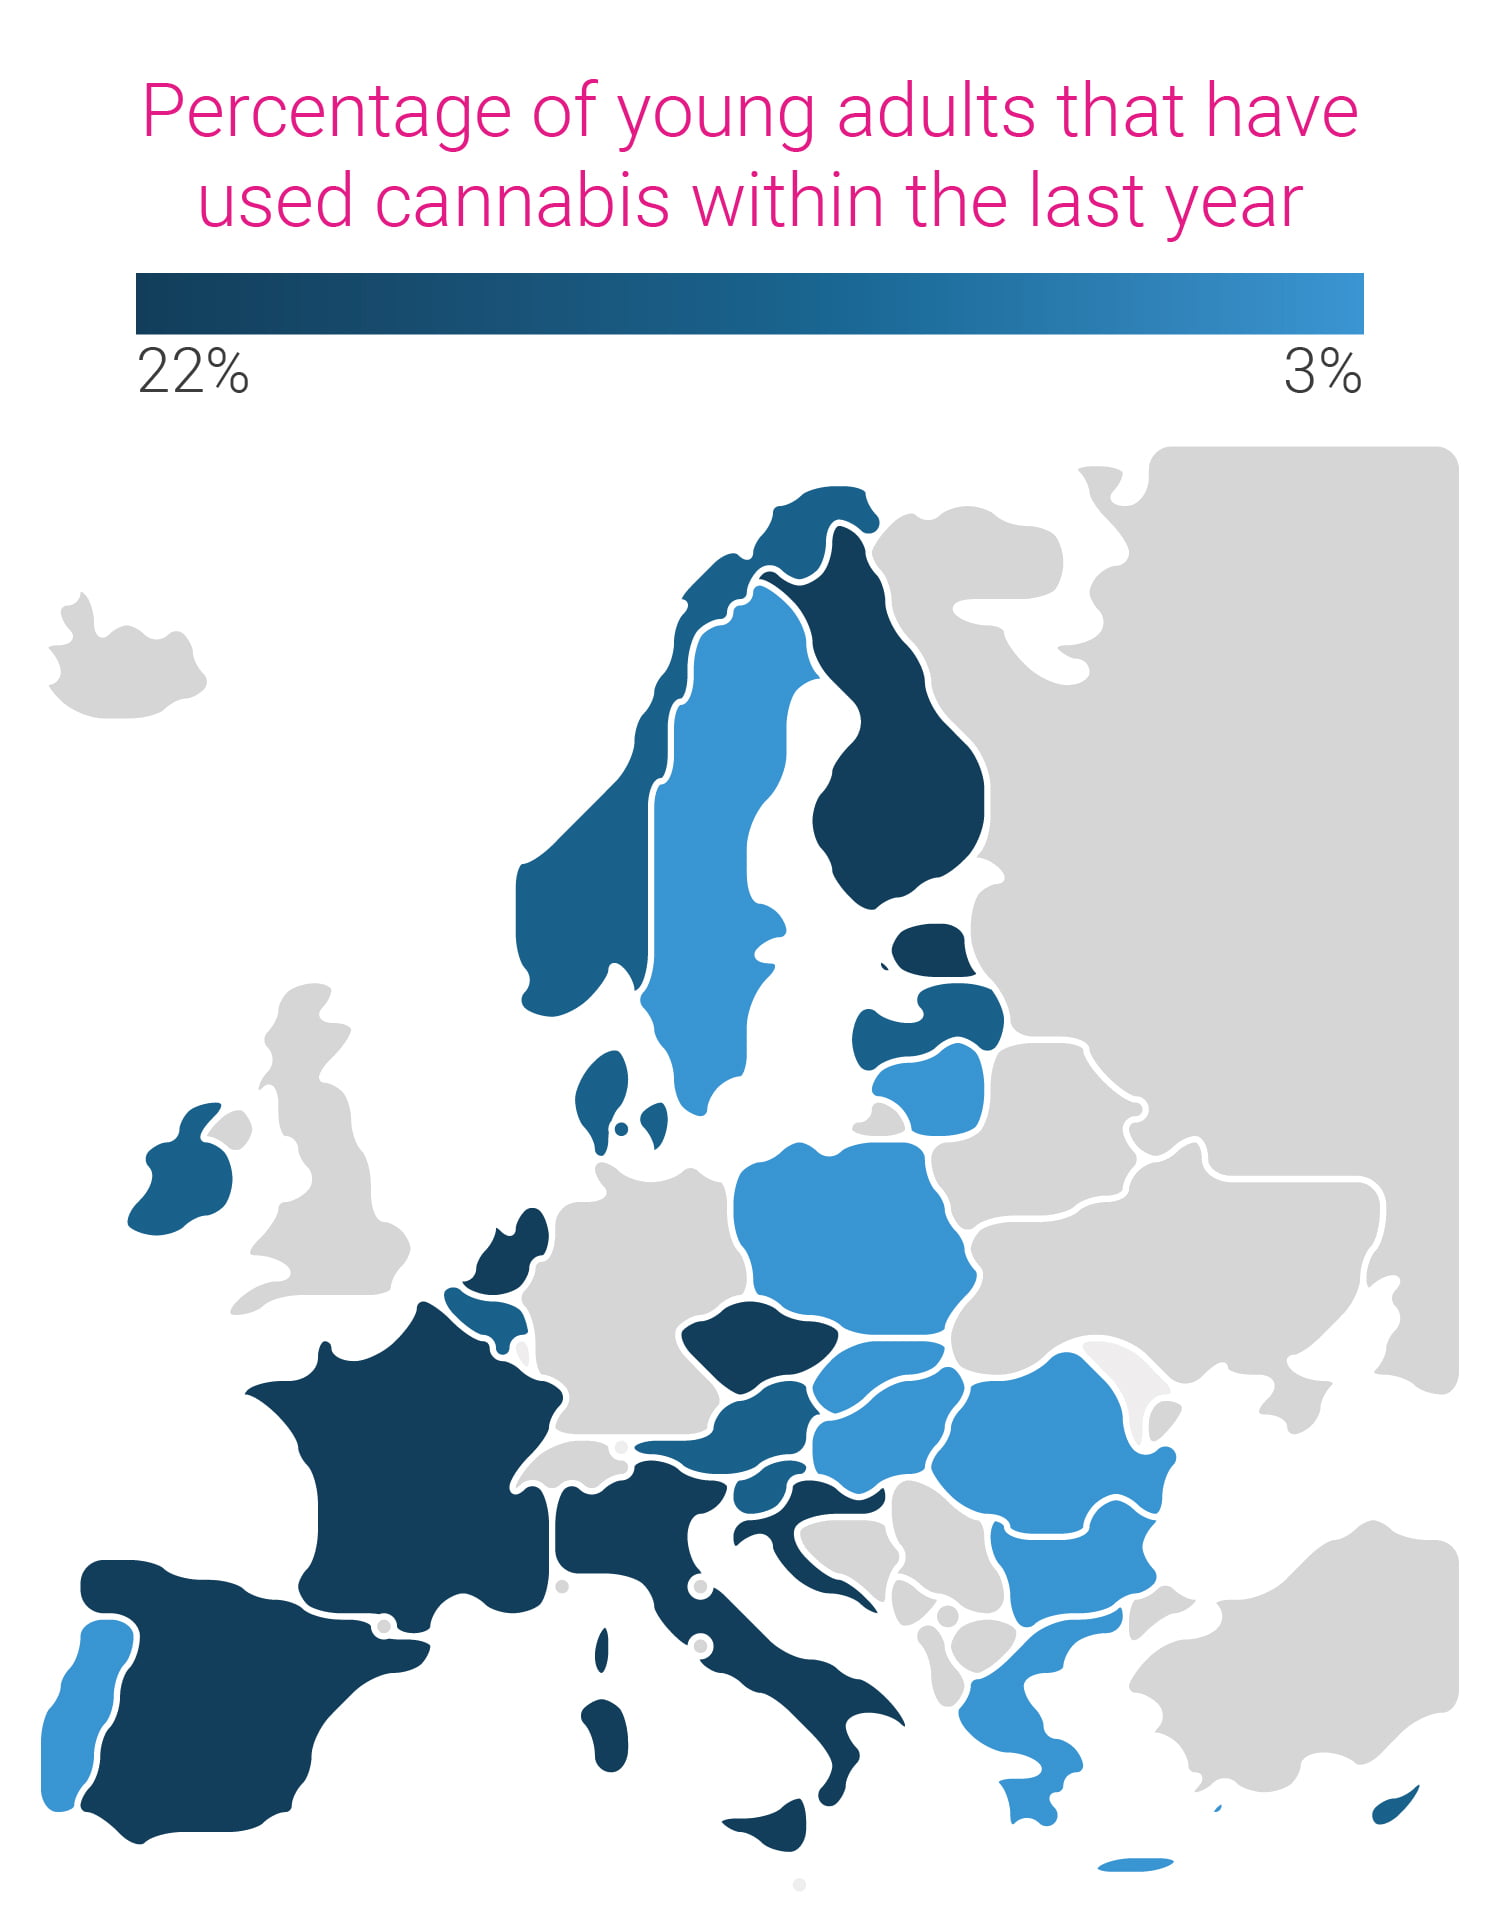 Percentage of young adults that have used cannabis within the last year